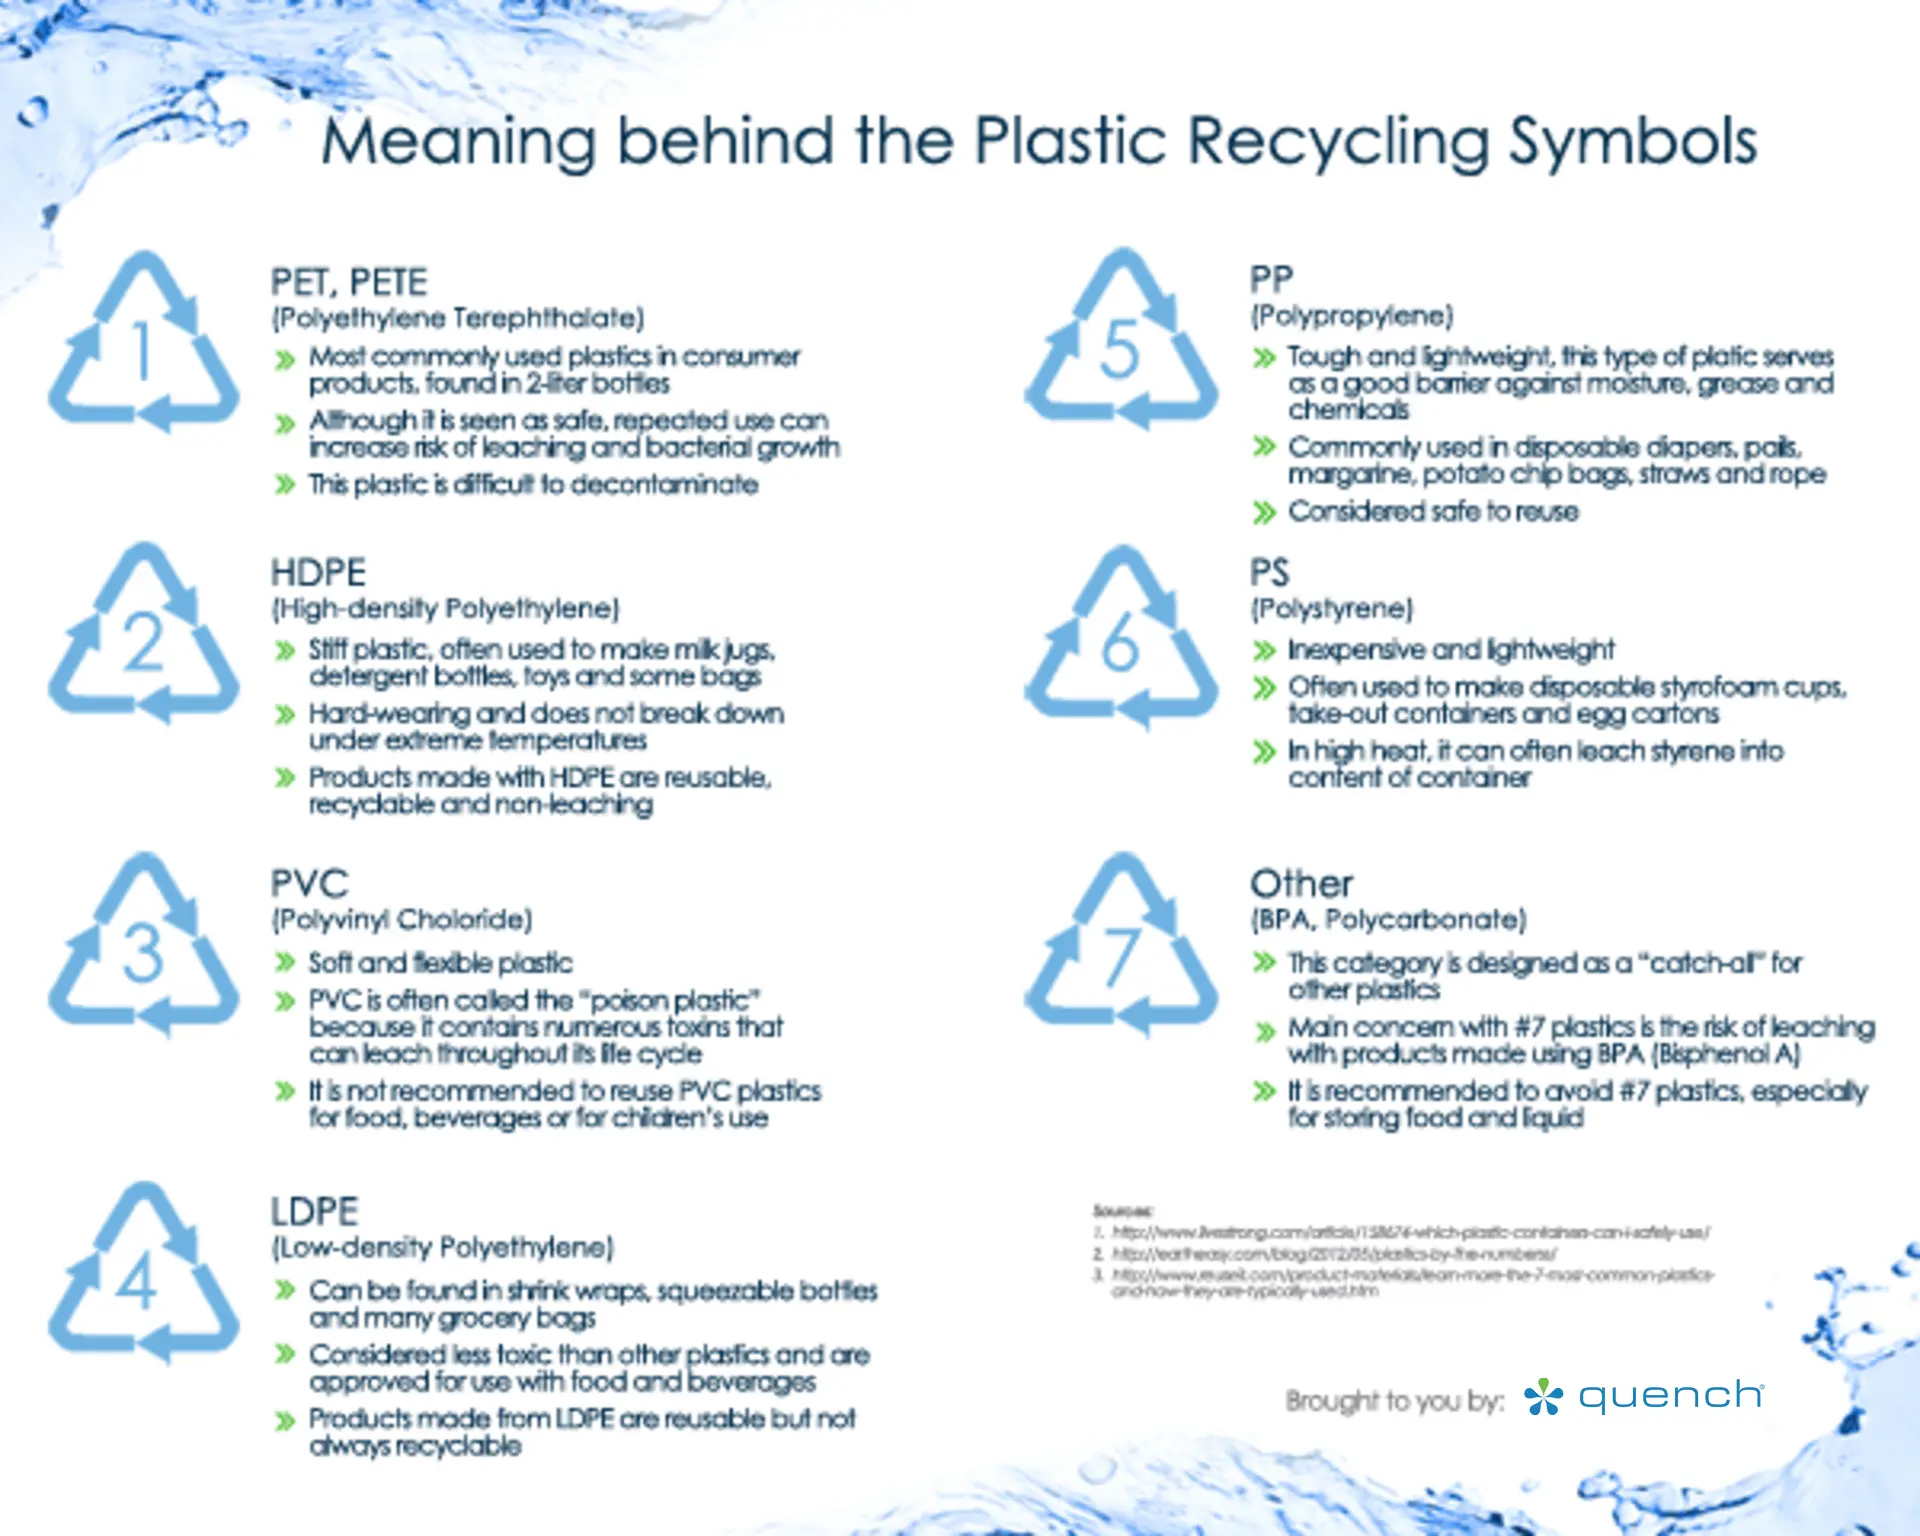 csm_plastic-symbols-and-meanings_4ca7a2eace copy